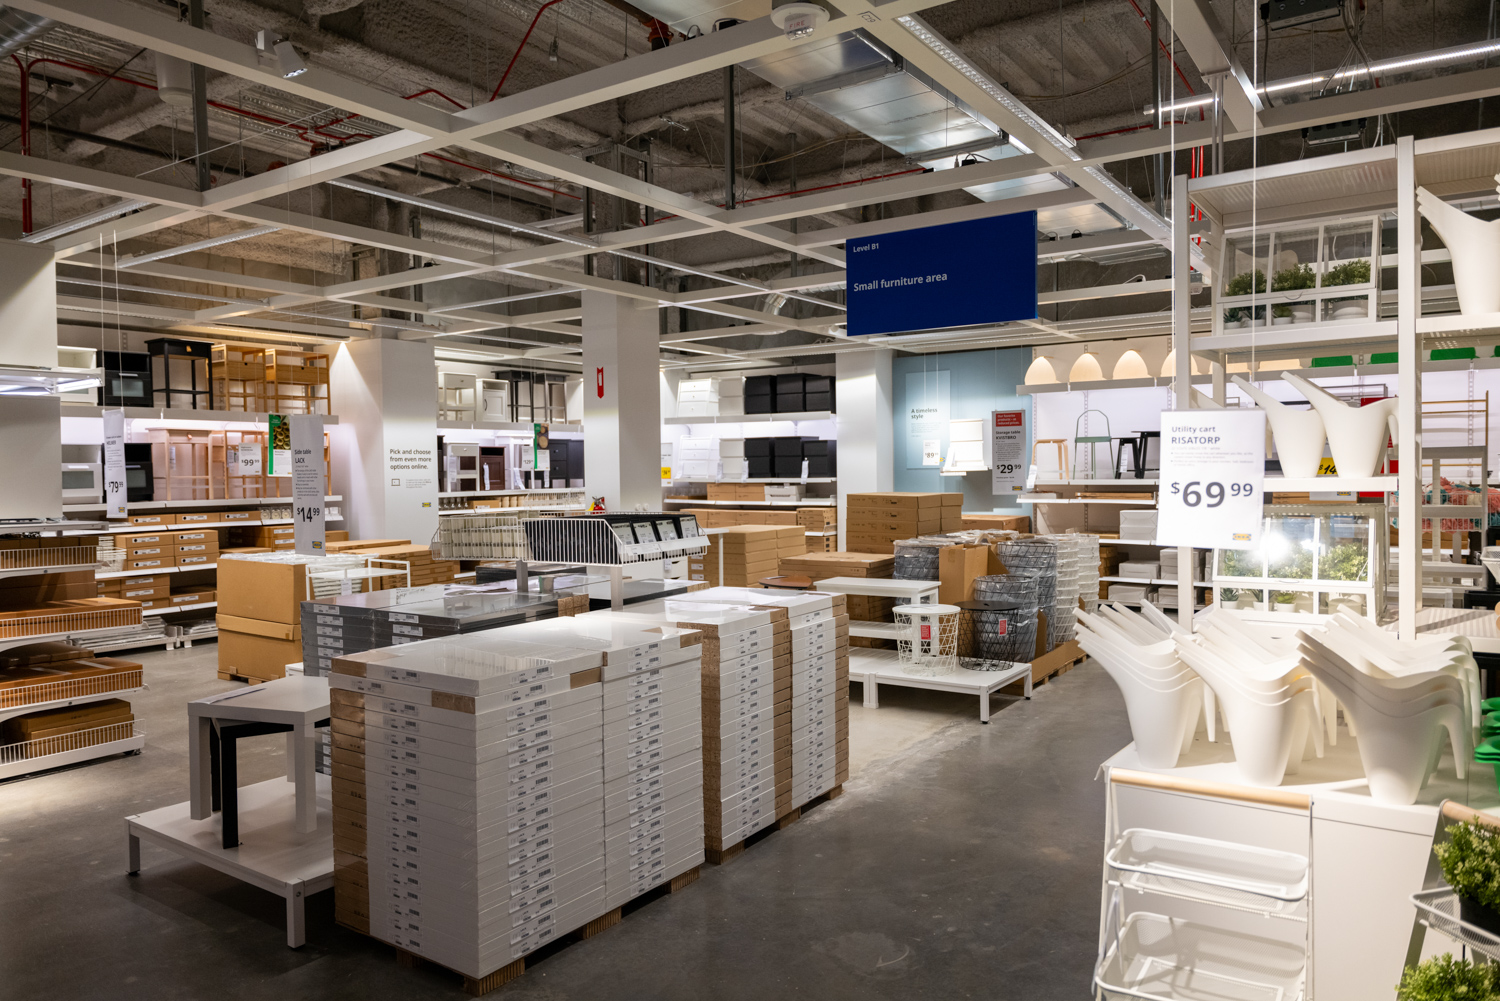 Interior views of the new IKEA store in San Francisco, image by Brandon Lavoie courtesy IKEA